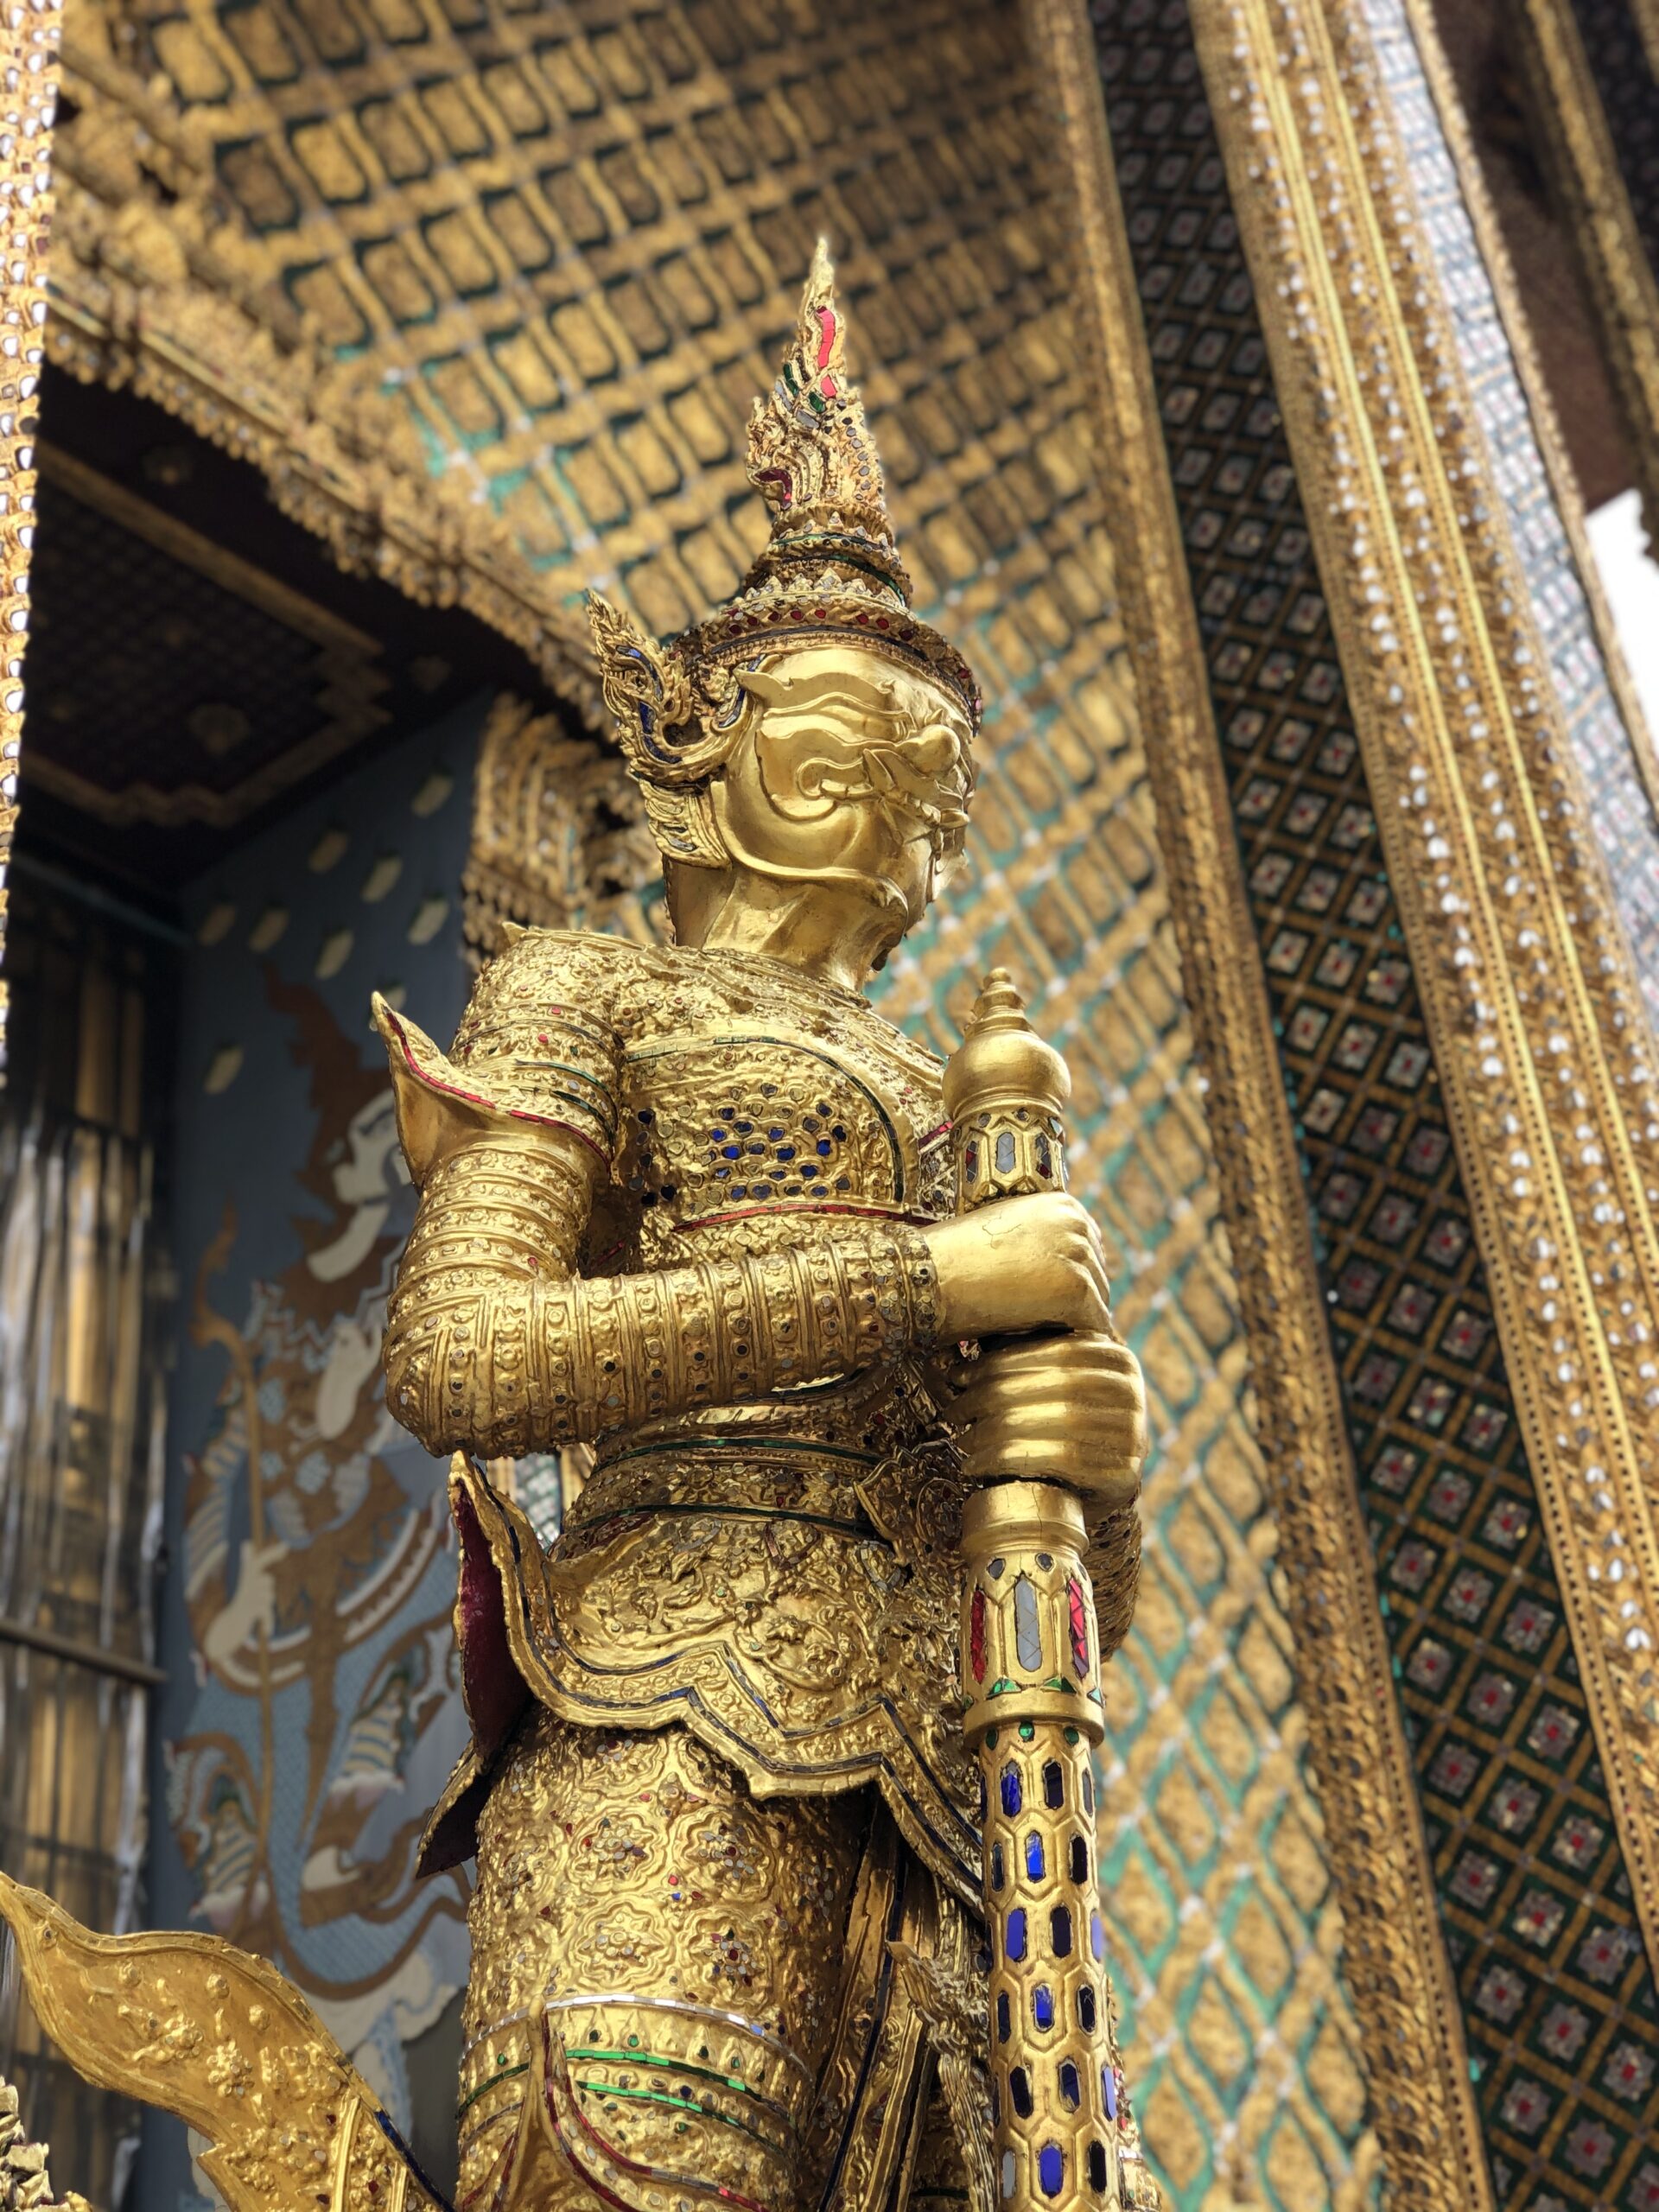 Statues of demons at Wat Phra Kaew, a temple in the royal palace.